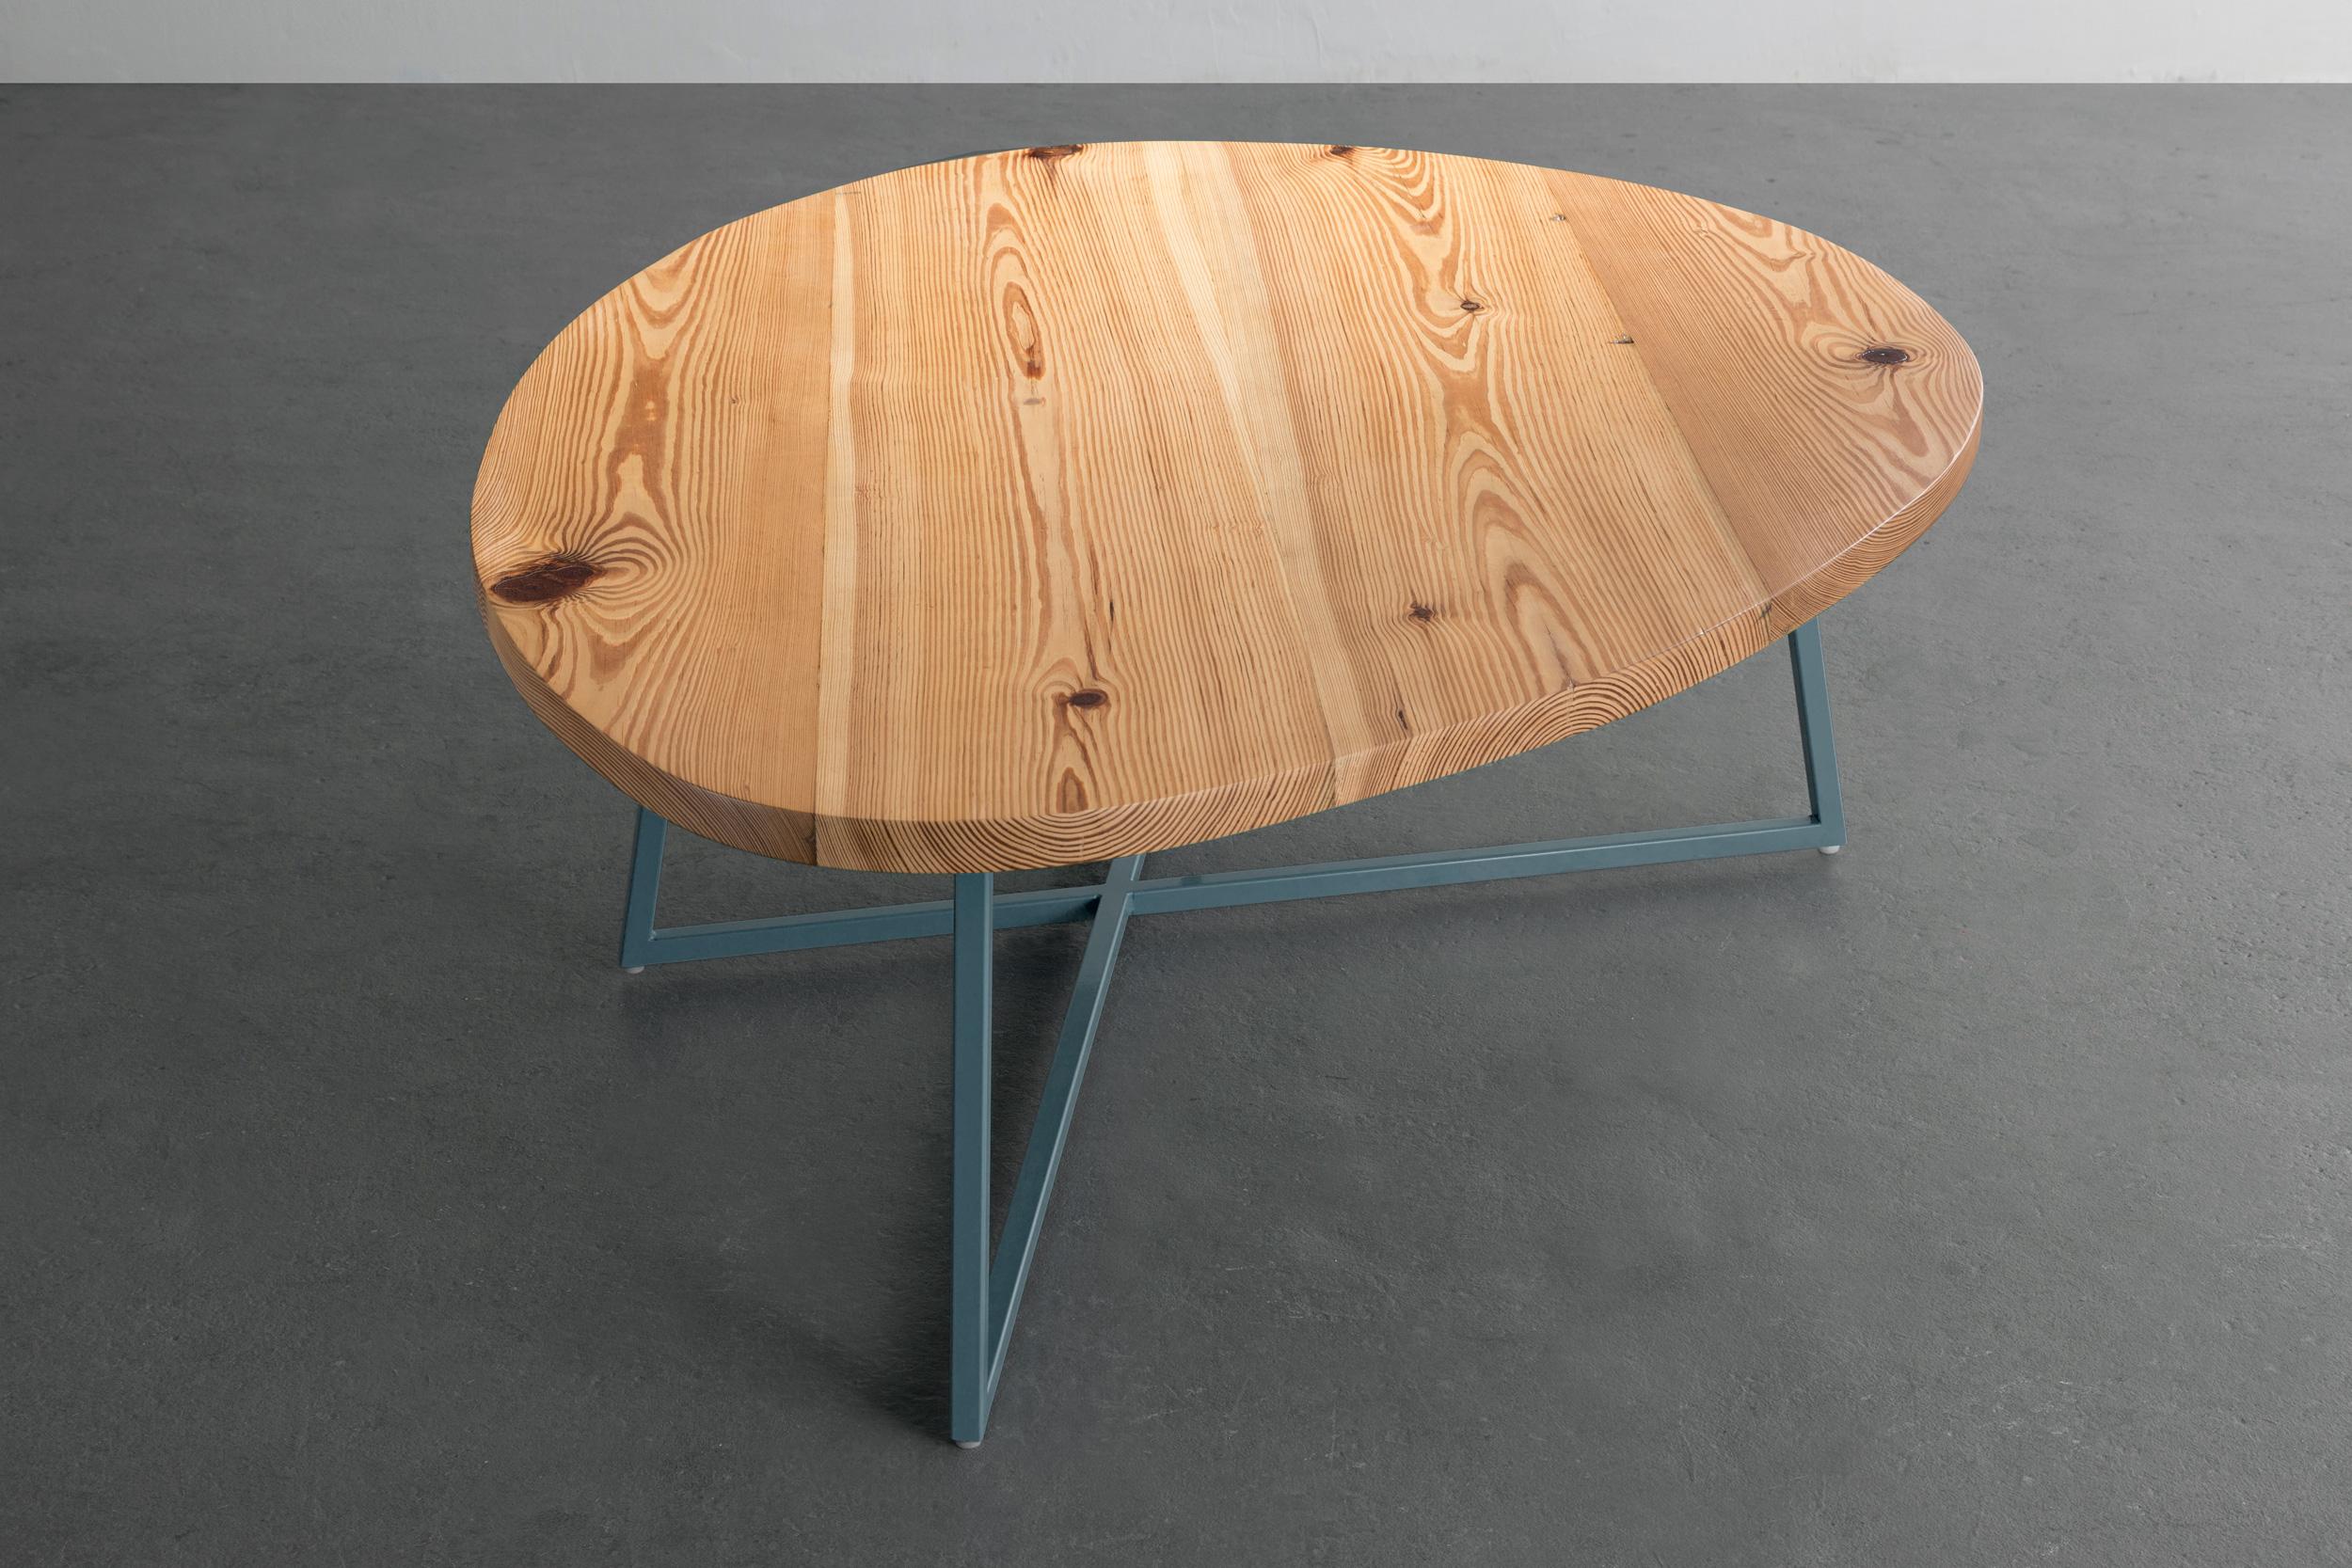 Contemporary Noguchoff Coffee Table, Powder Coated Steel, Antique Heart Pine, Handmade in USA